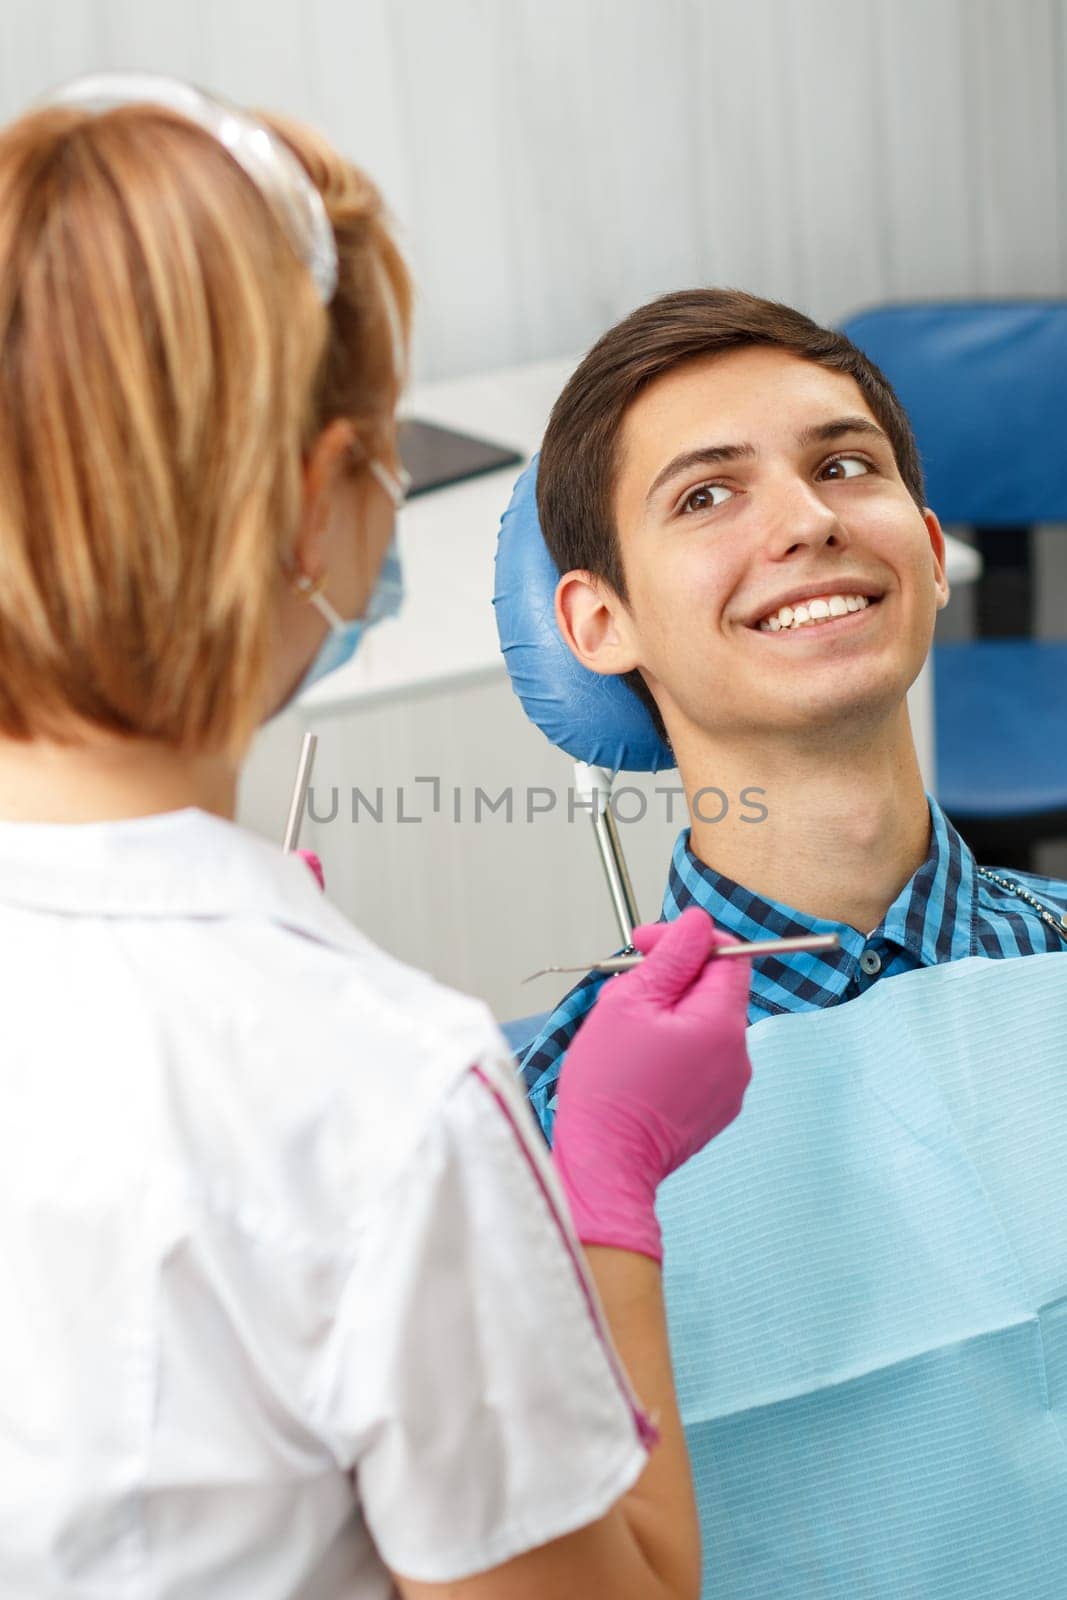 Handsome young man is having dental check up in dental office. Dentist is examining a patient with dental tools